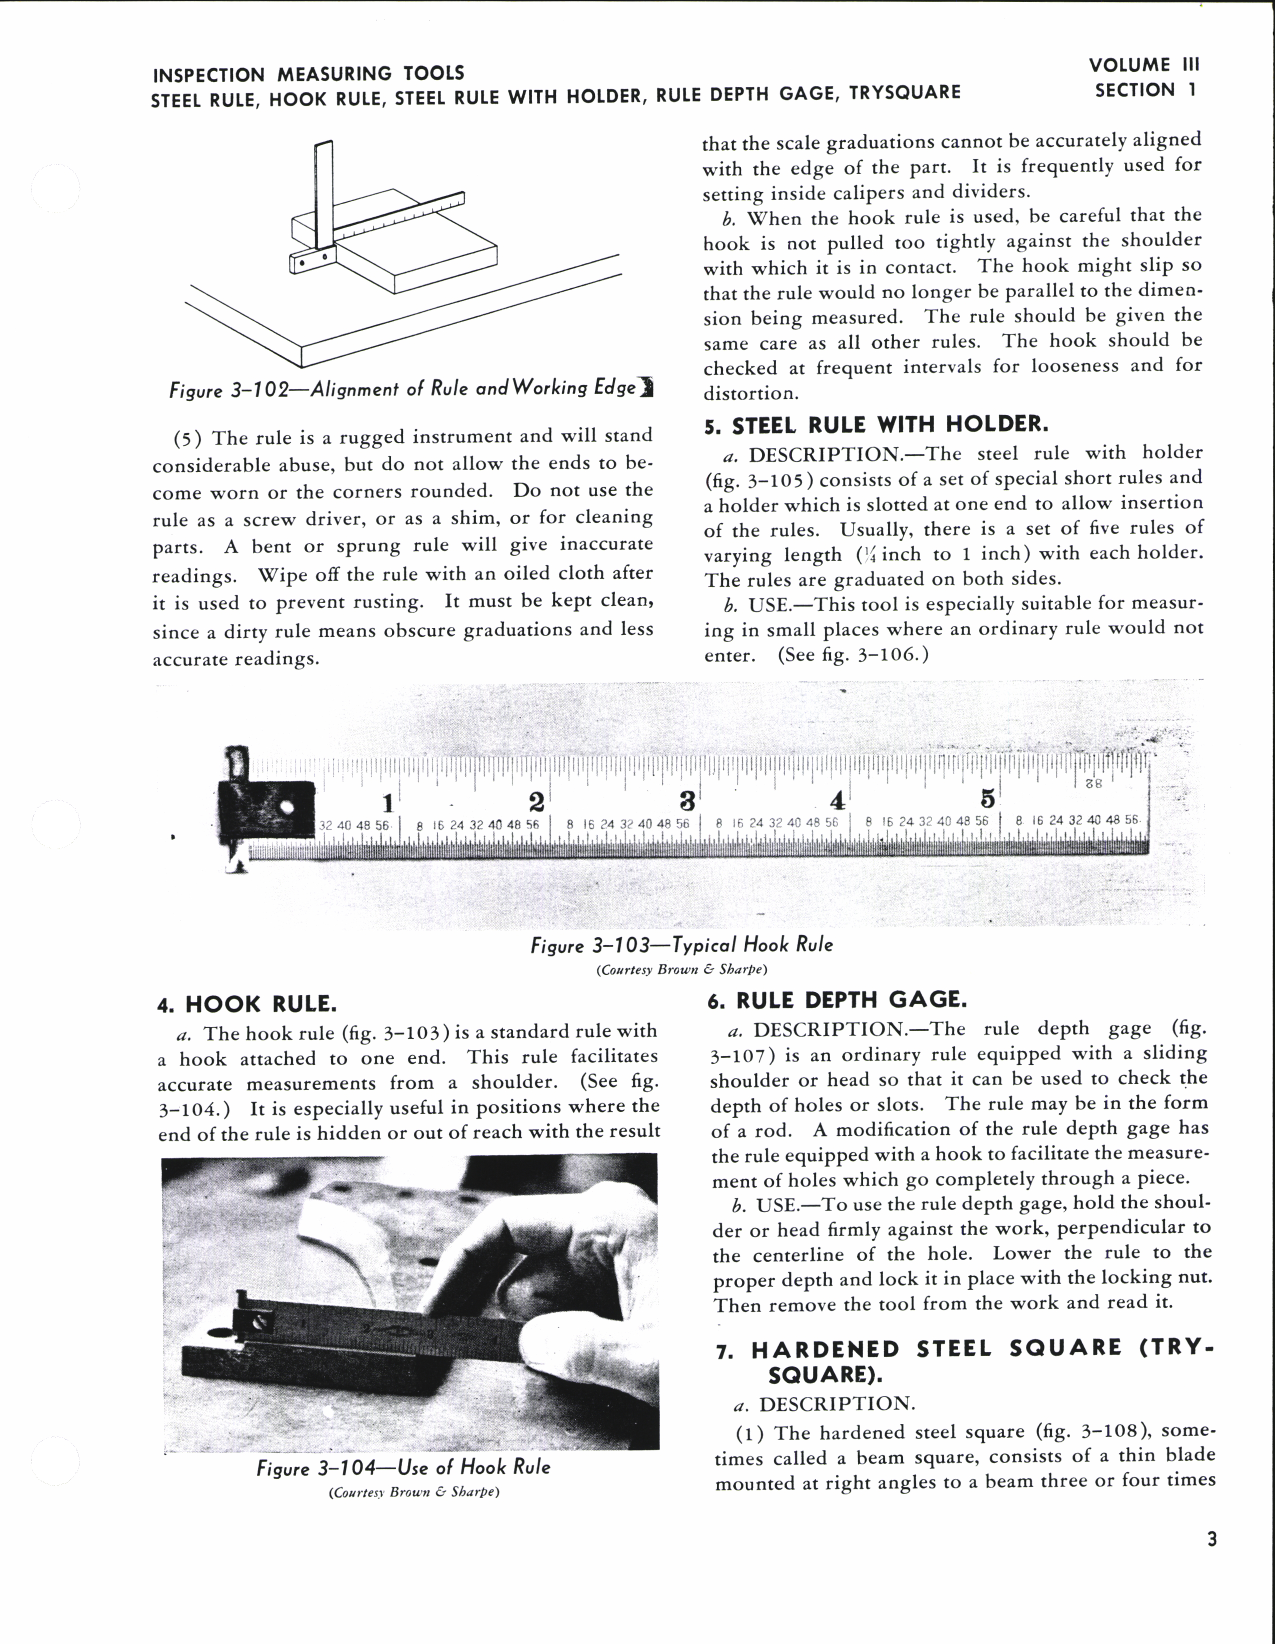 Sample page 7 from AirCorps Library document: Aeronautical Technical Inspection Manual - Inspection Measuring Tools